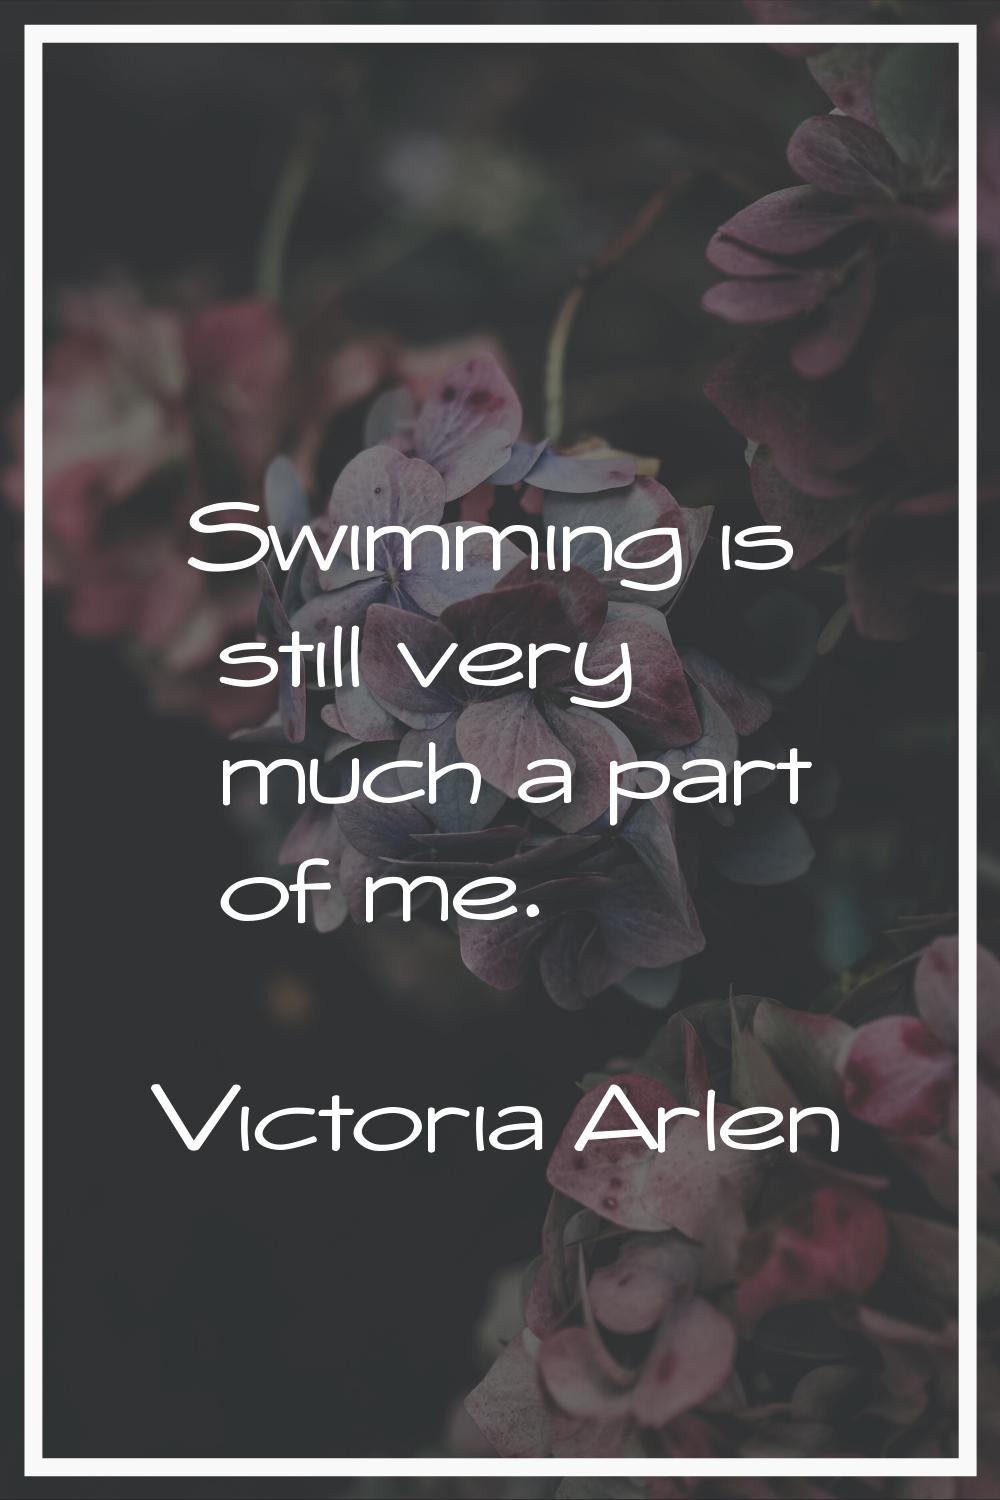 Swimming is still very much a part of me.